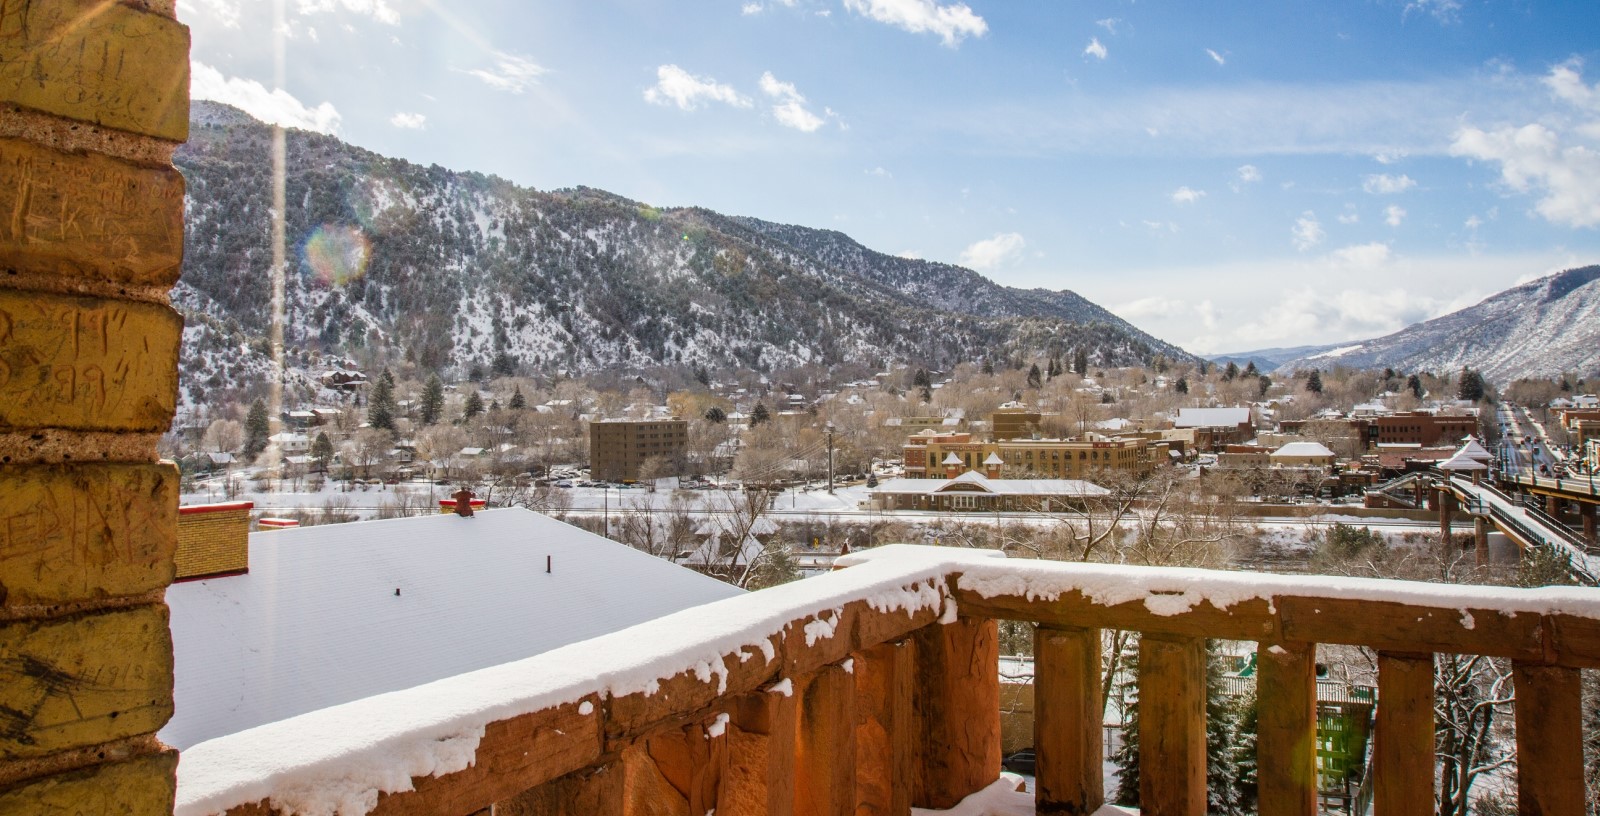 Explore the many activities and landmarks that surround Hotel Colorado.